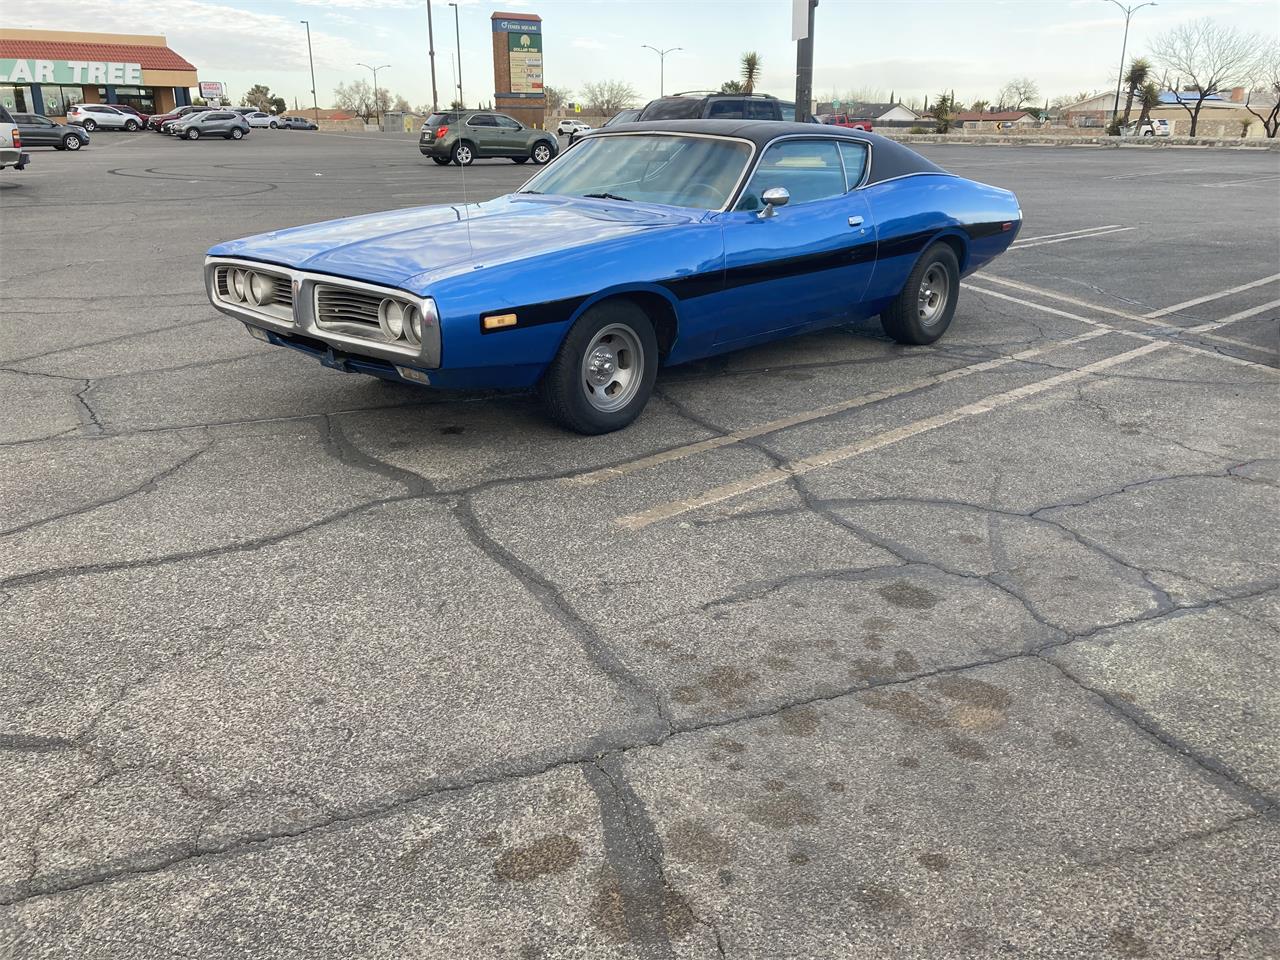 For Sale: 1972 Dodge Charger in El Paso, Texas for sale in El Paso, TX